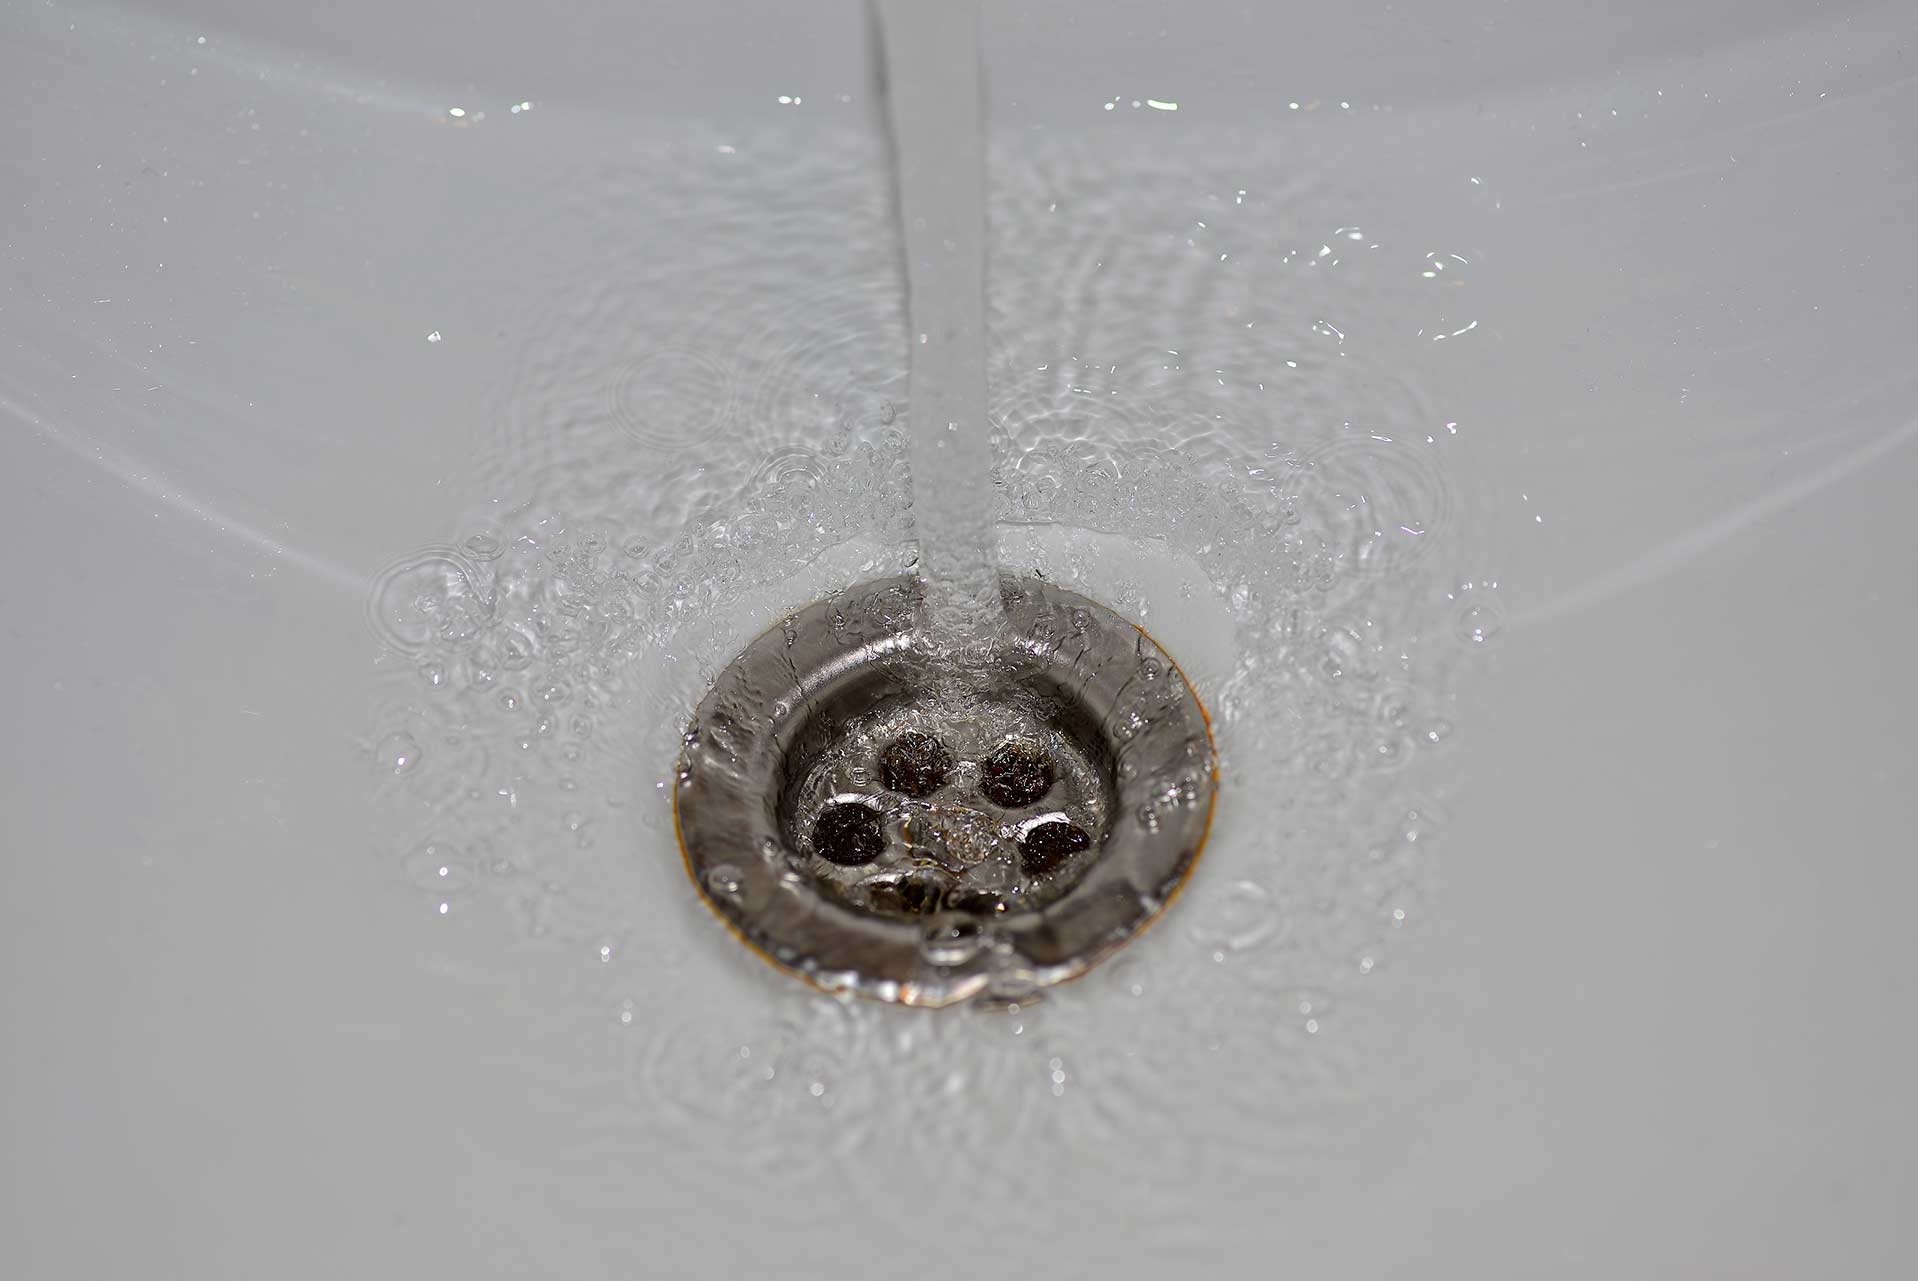 A2B Drains provides services to unblock blocked sinks and drains for properties in Swansea.